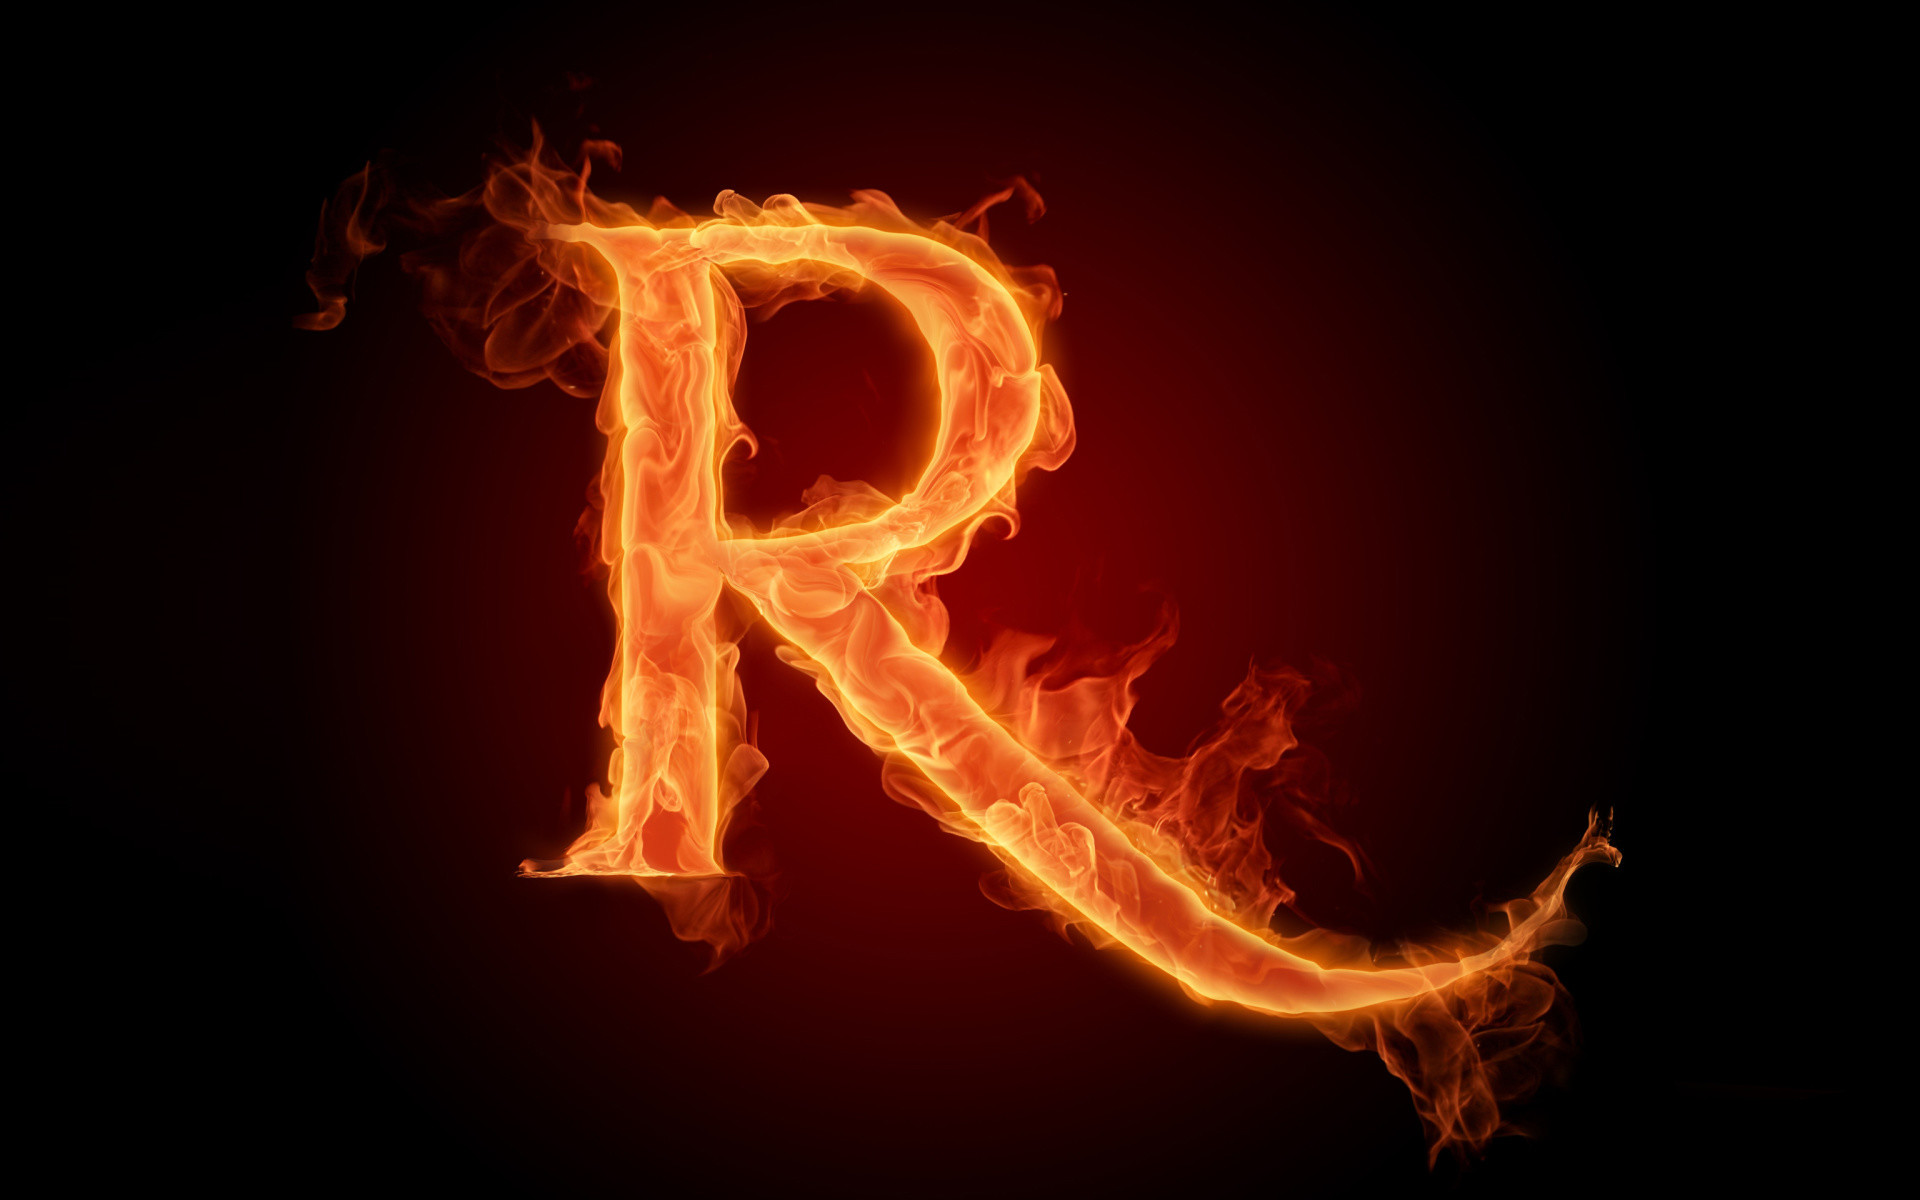 1920x1200 The fiery English alphabet picture S Wallpapers - HD Wallpapers 73633